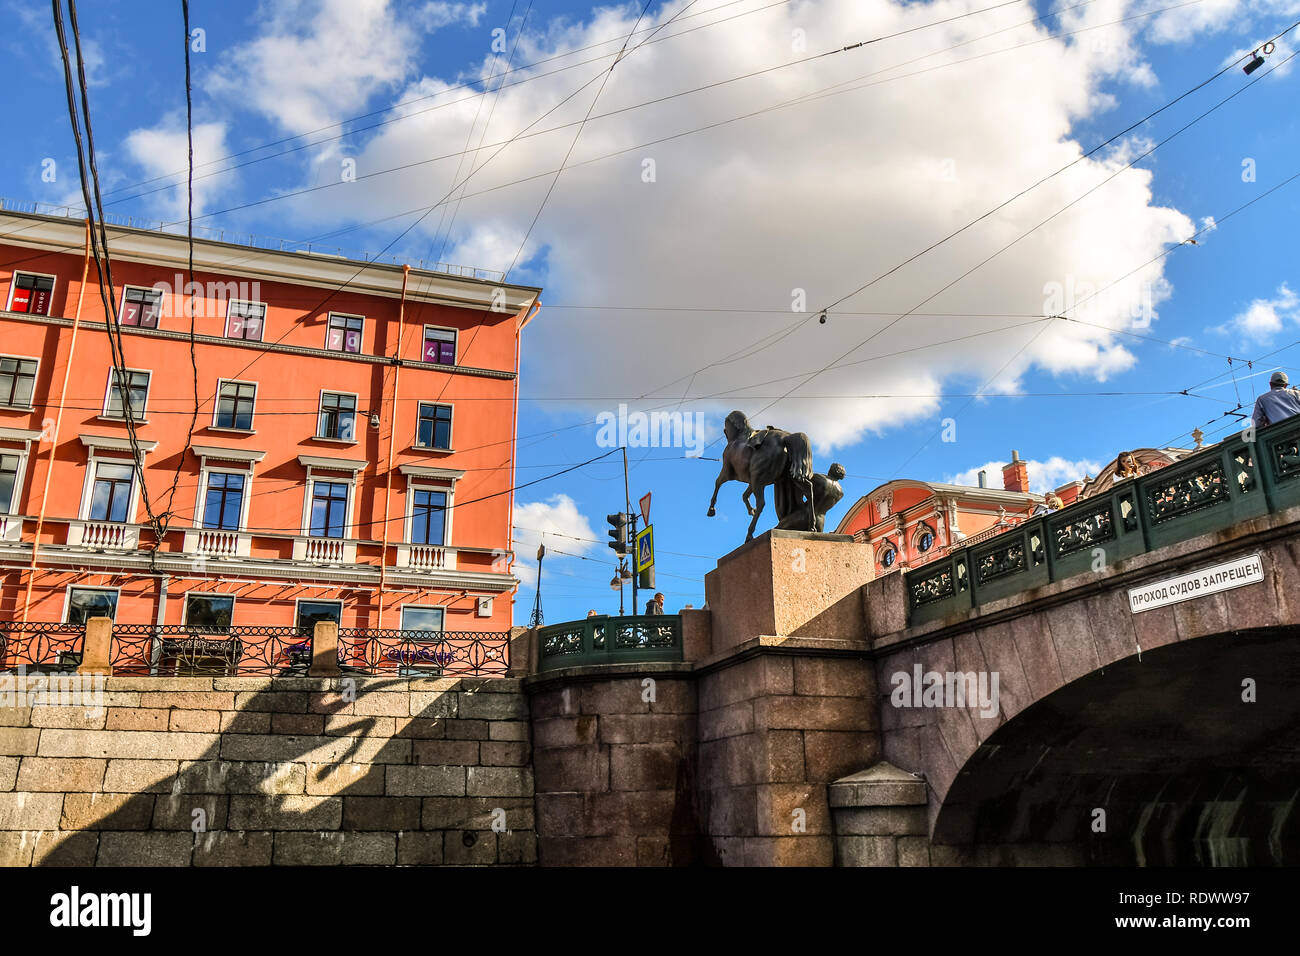 View from a canal of electrical and telephone wires crossing erratically above Anichkov Bridge and Horse Tamer sculpture in Saint Petersburg, Russia Stock Photo